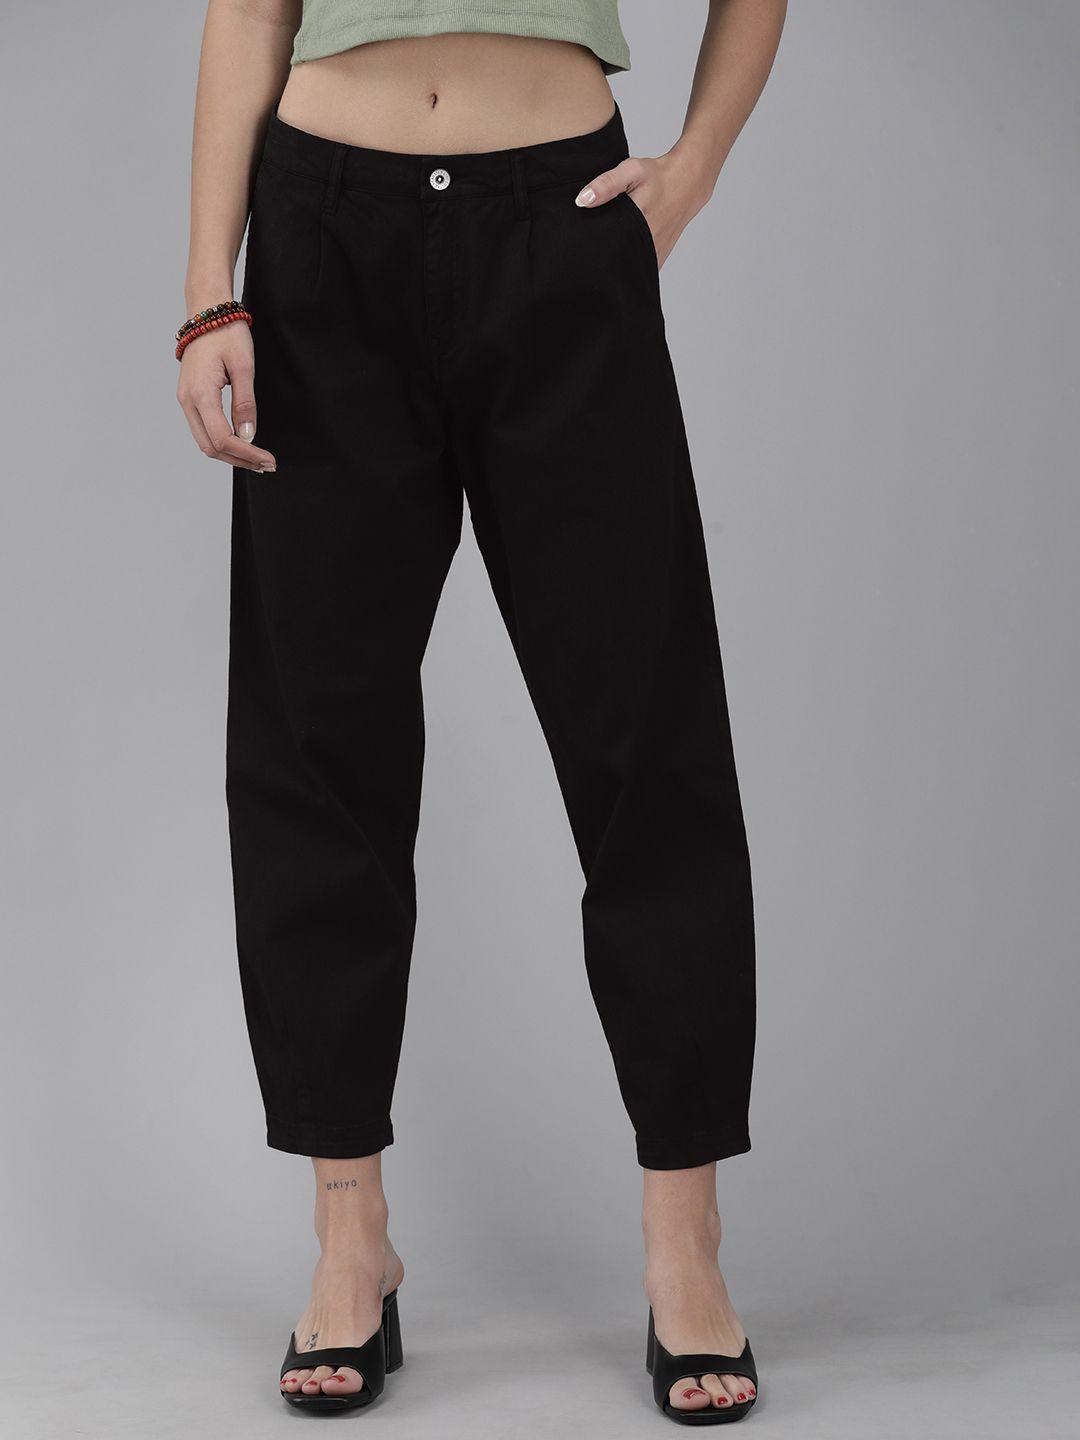 the-roadster-lifestyle-co-women-black-printed-slouchy-fit-cropped-regular-trousers